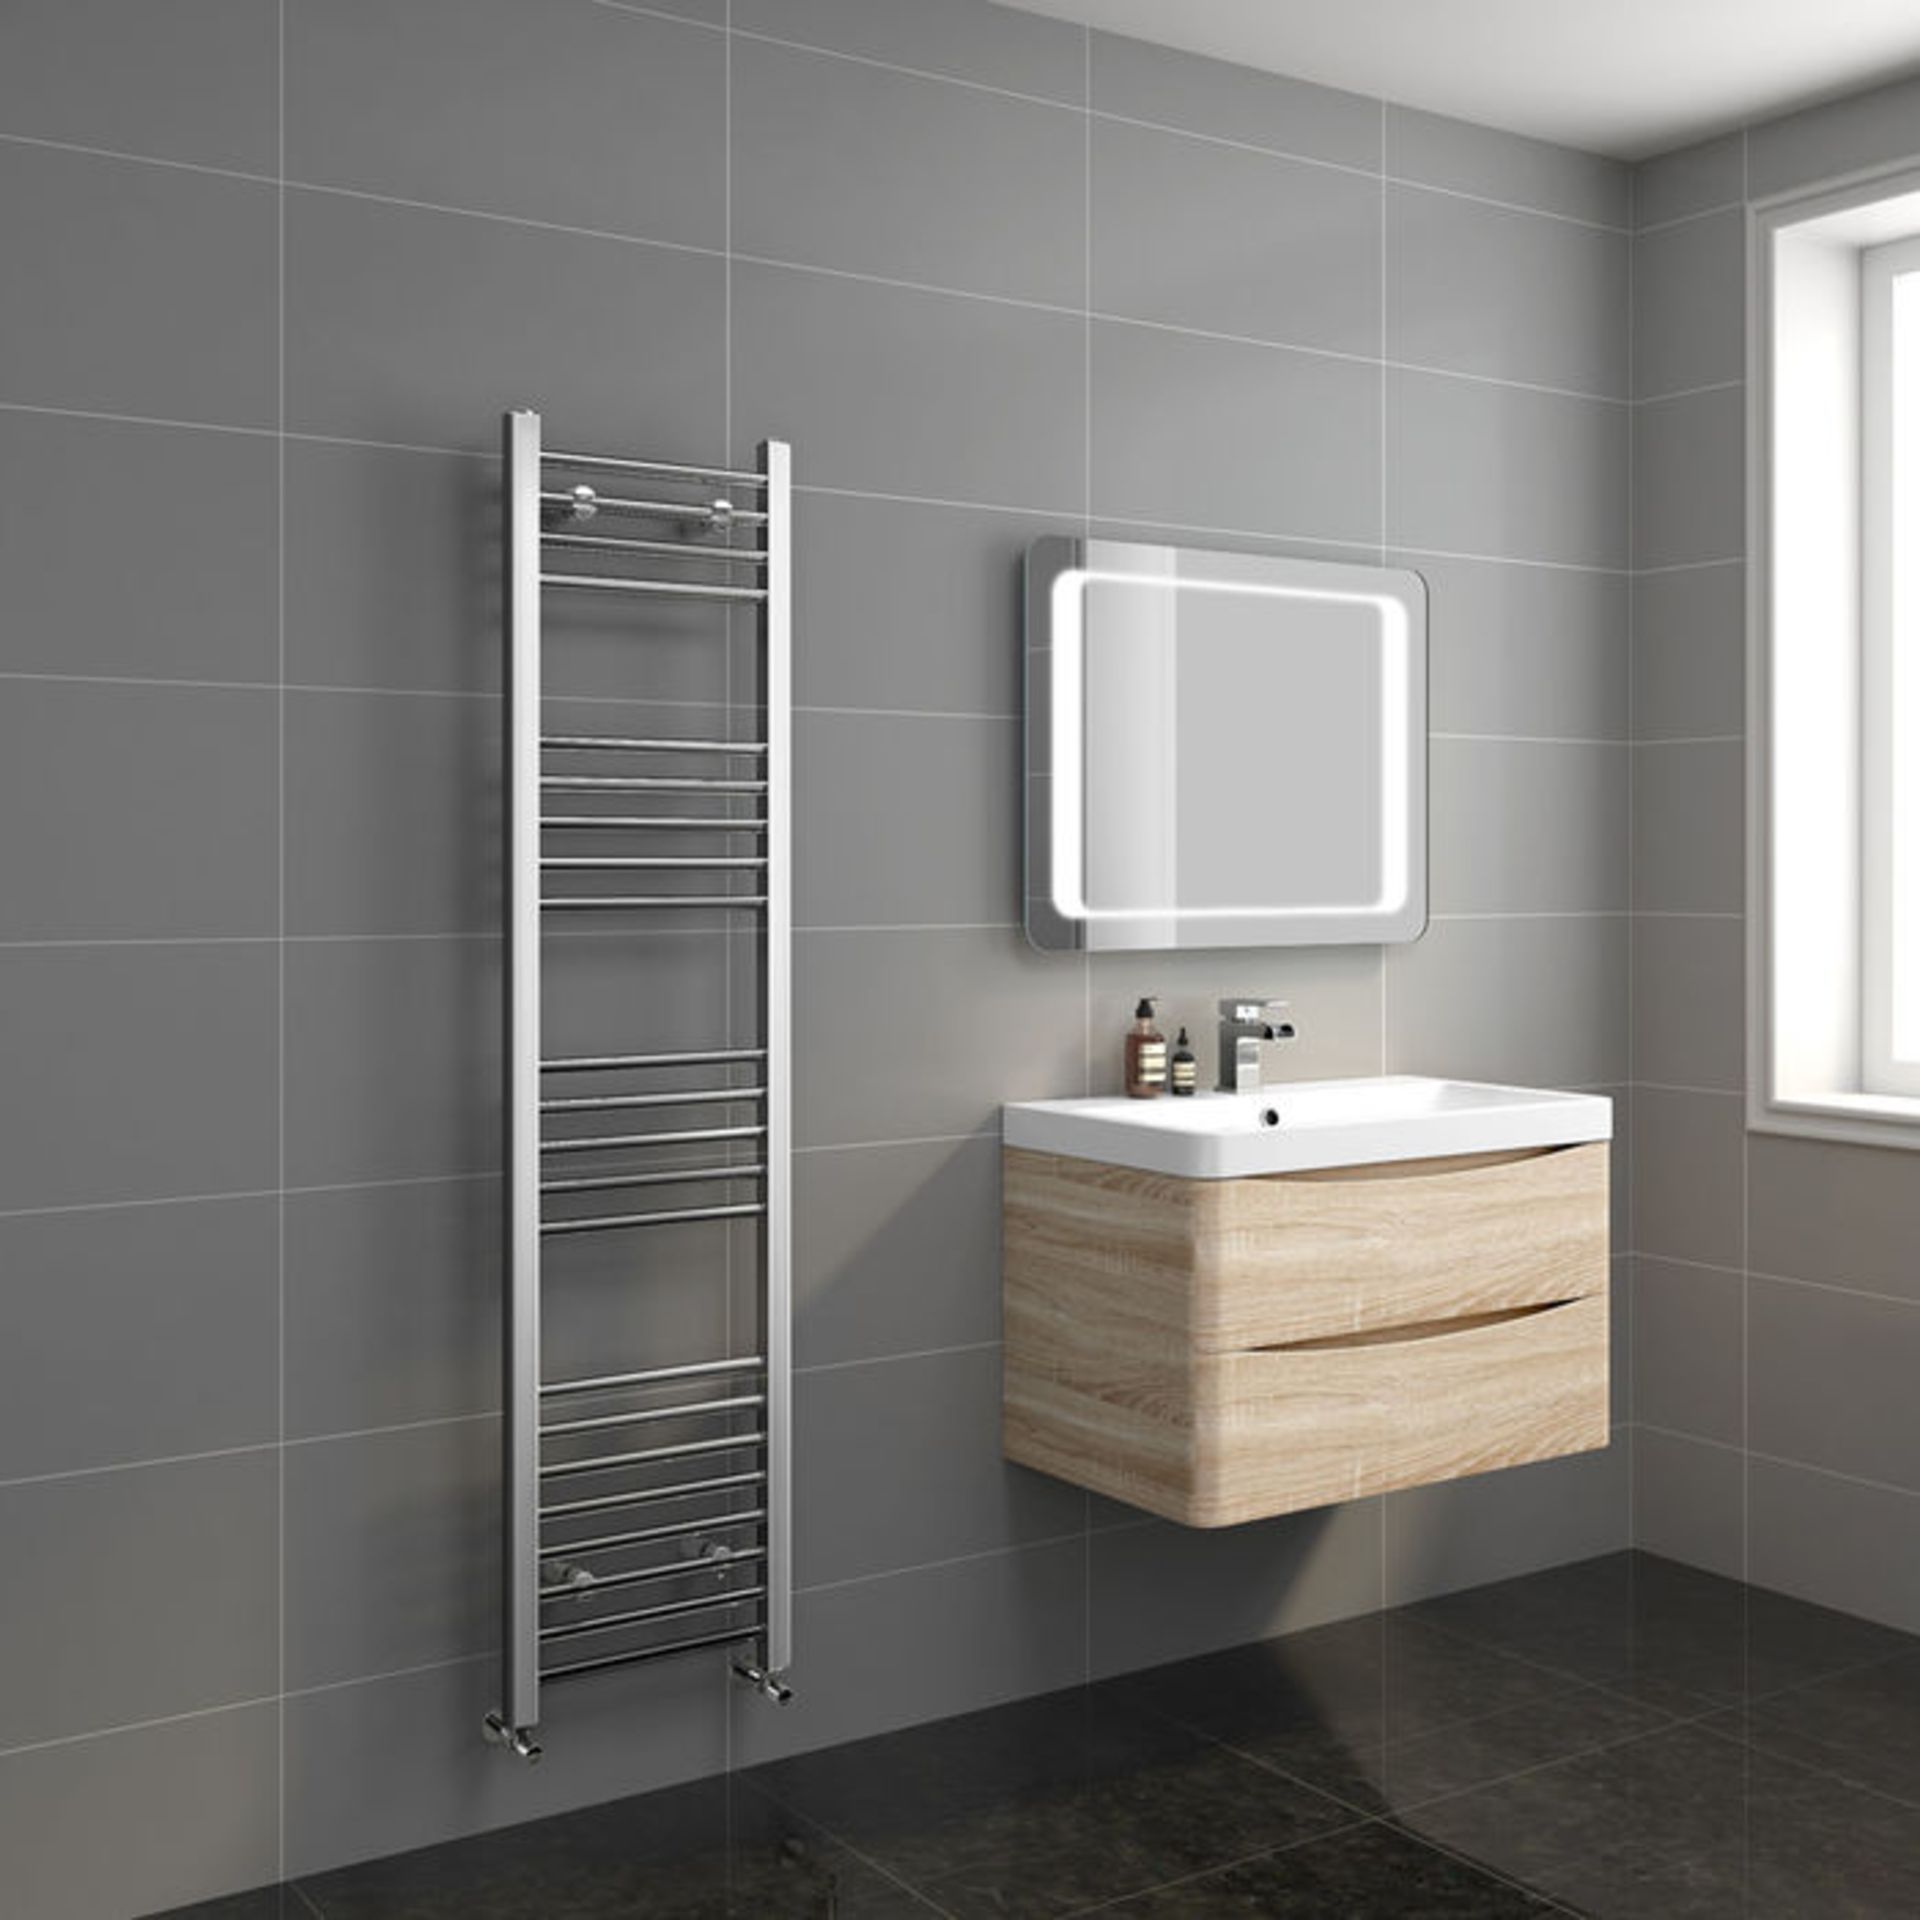 (H4) 1600x400mm - 20mm Tubes - Chrome Heated Straight Rail Ladder Towel Radiator. Low carbon steel - Image 2 of 5